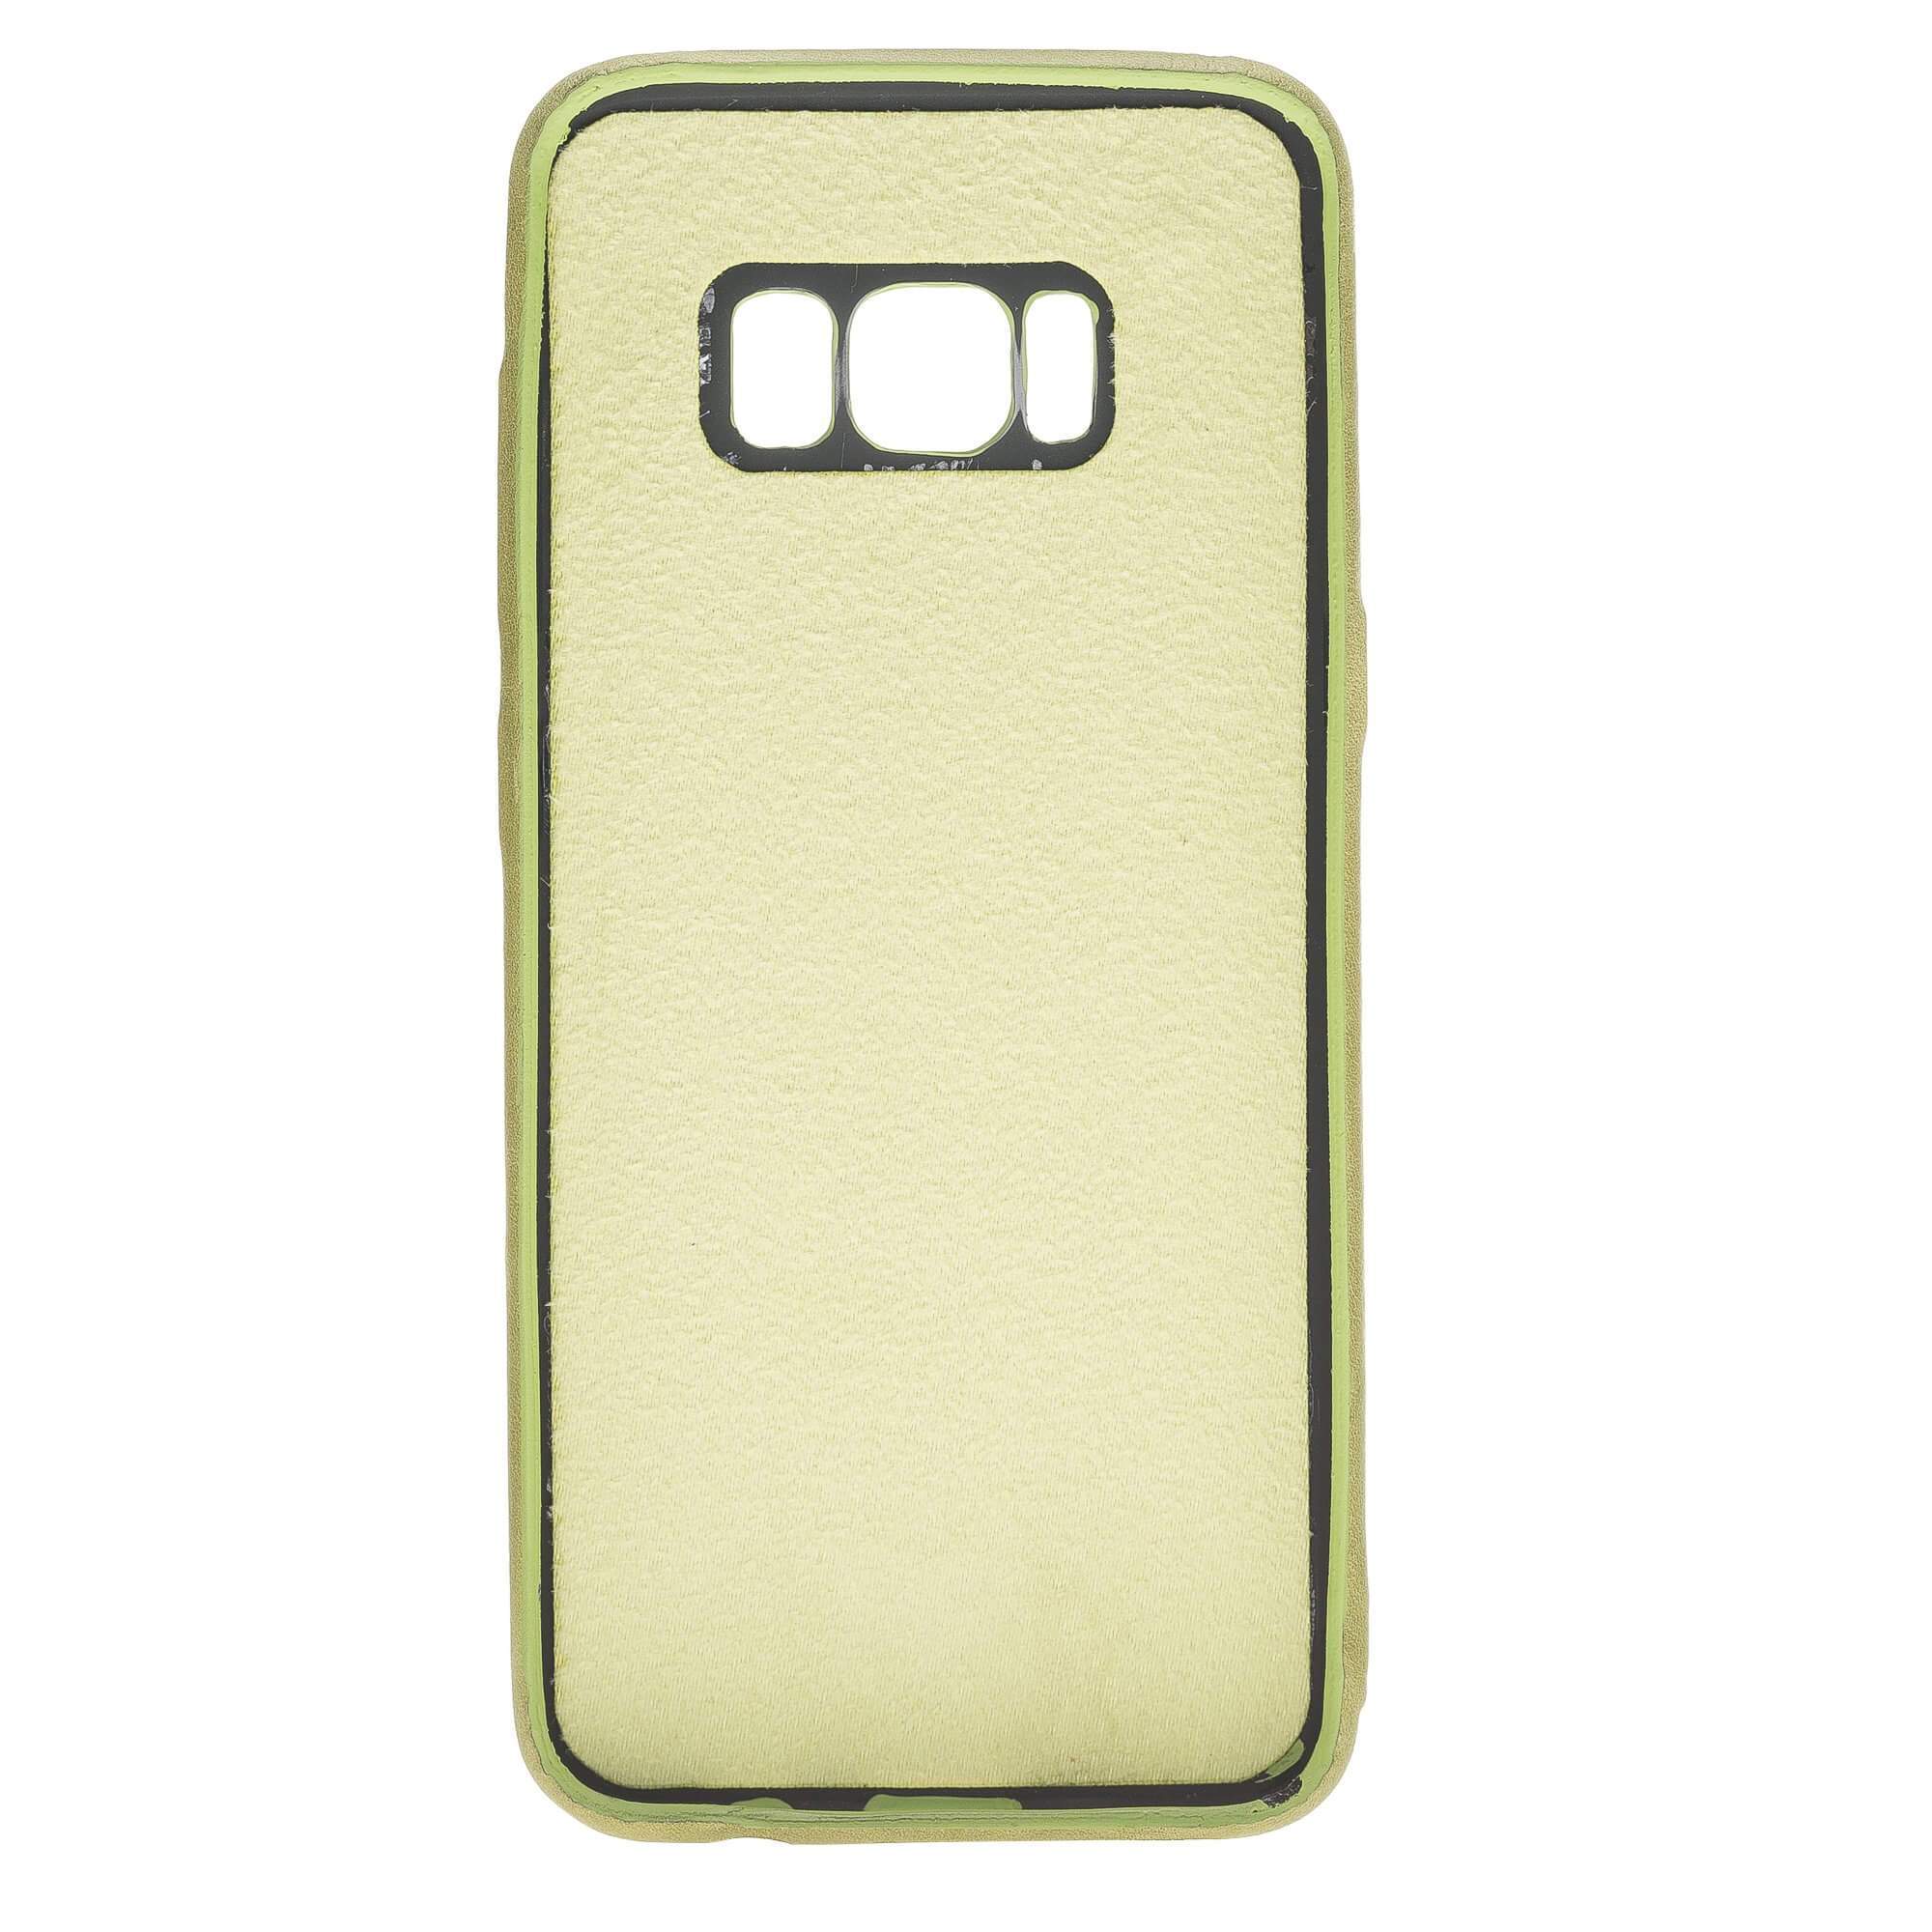 Phone Case Leather Ultra Cover with Credit Card Slots for Samsung S8 - Crazy Green Bouletta Shop